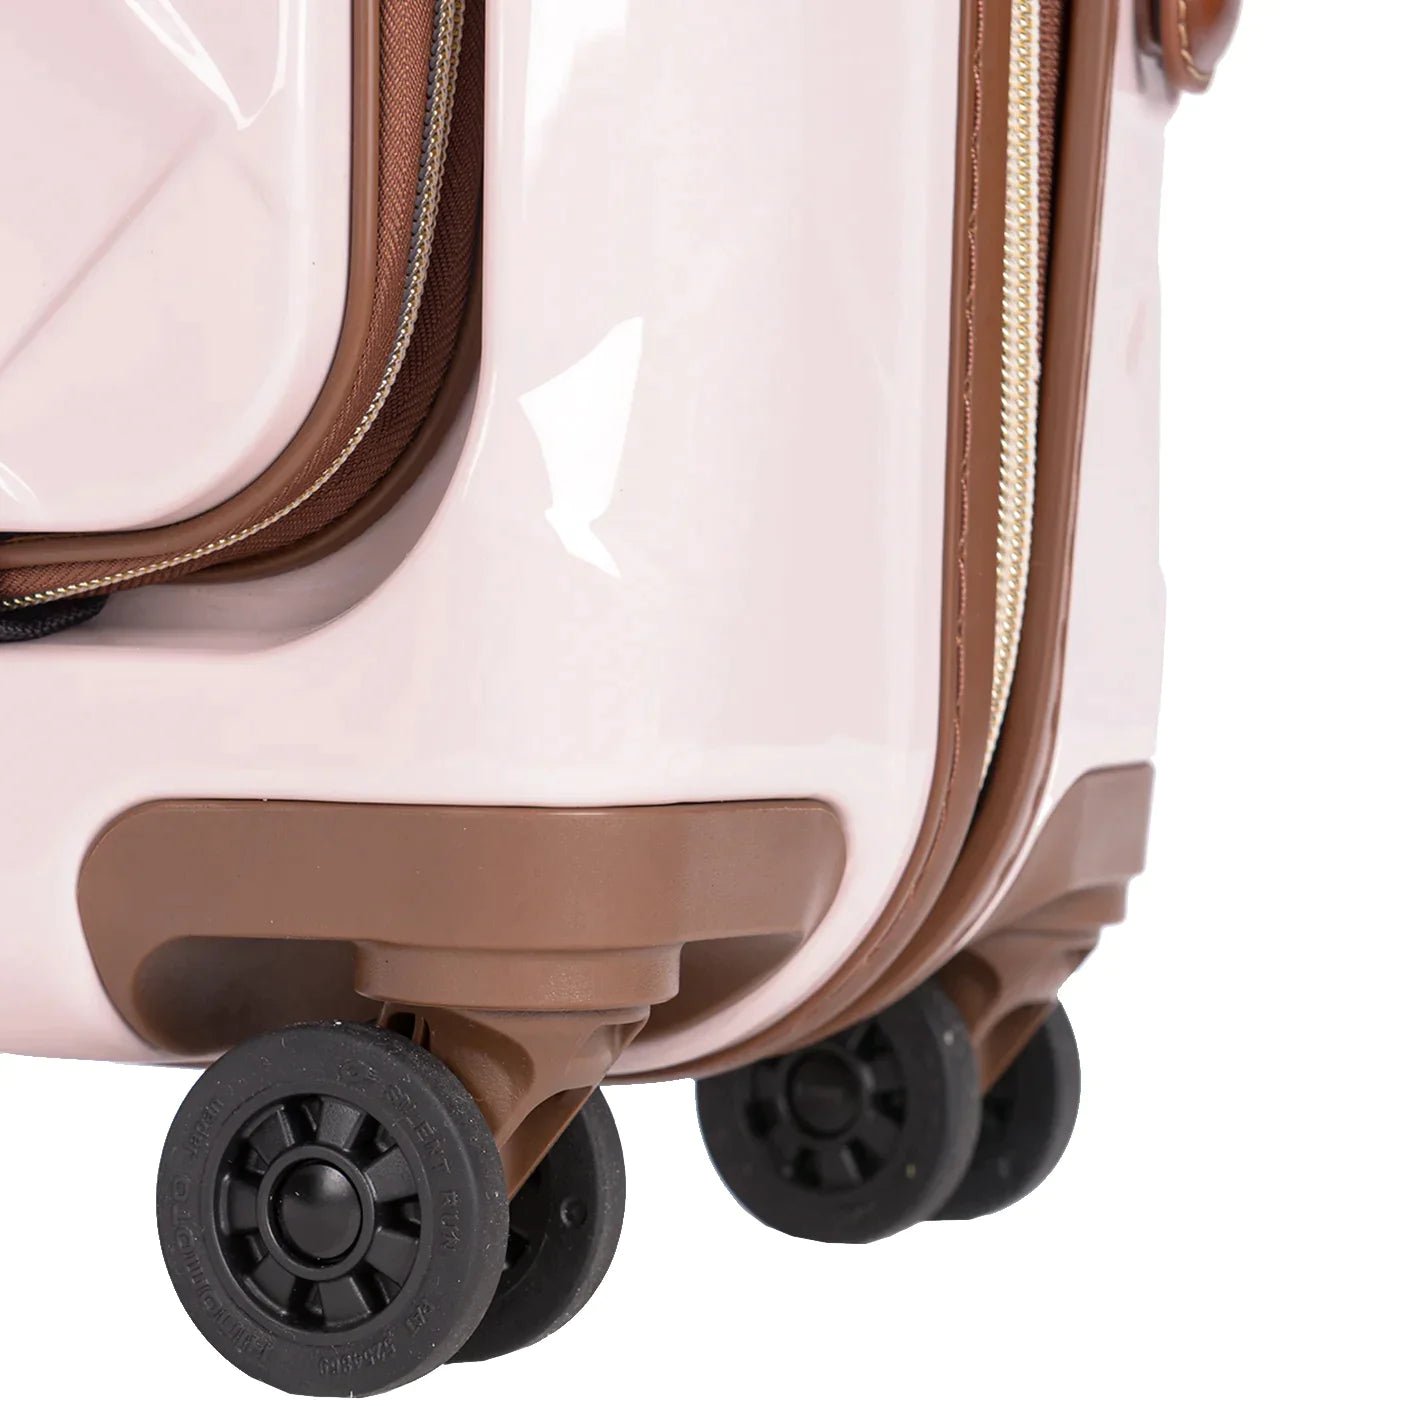 Stratic Leather &amp; More 4-wheel trolley with front pocket 55 cm - Blue